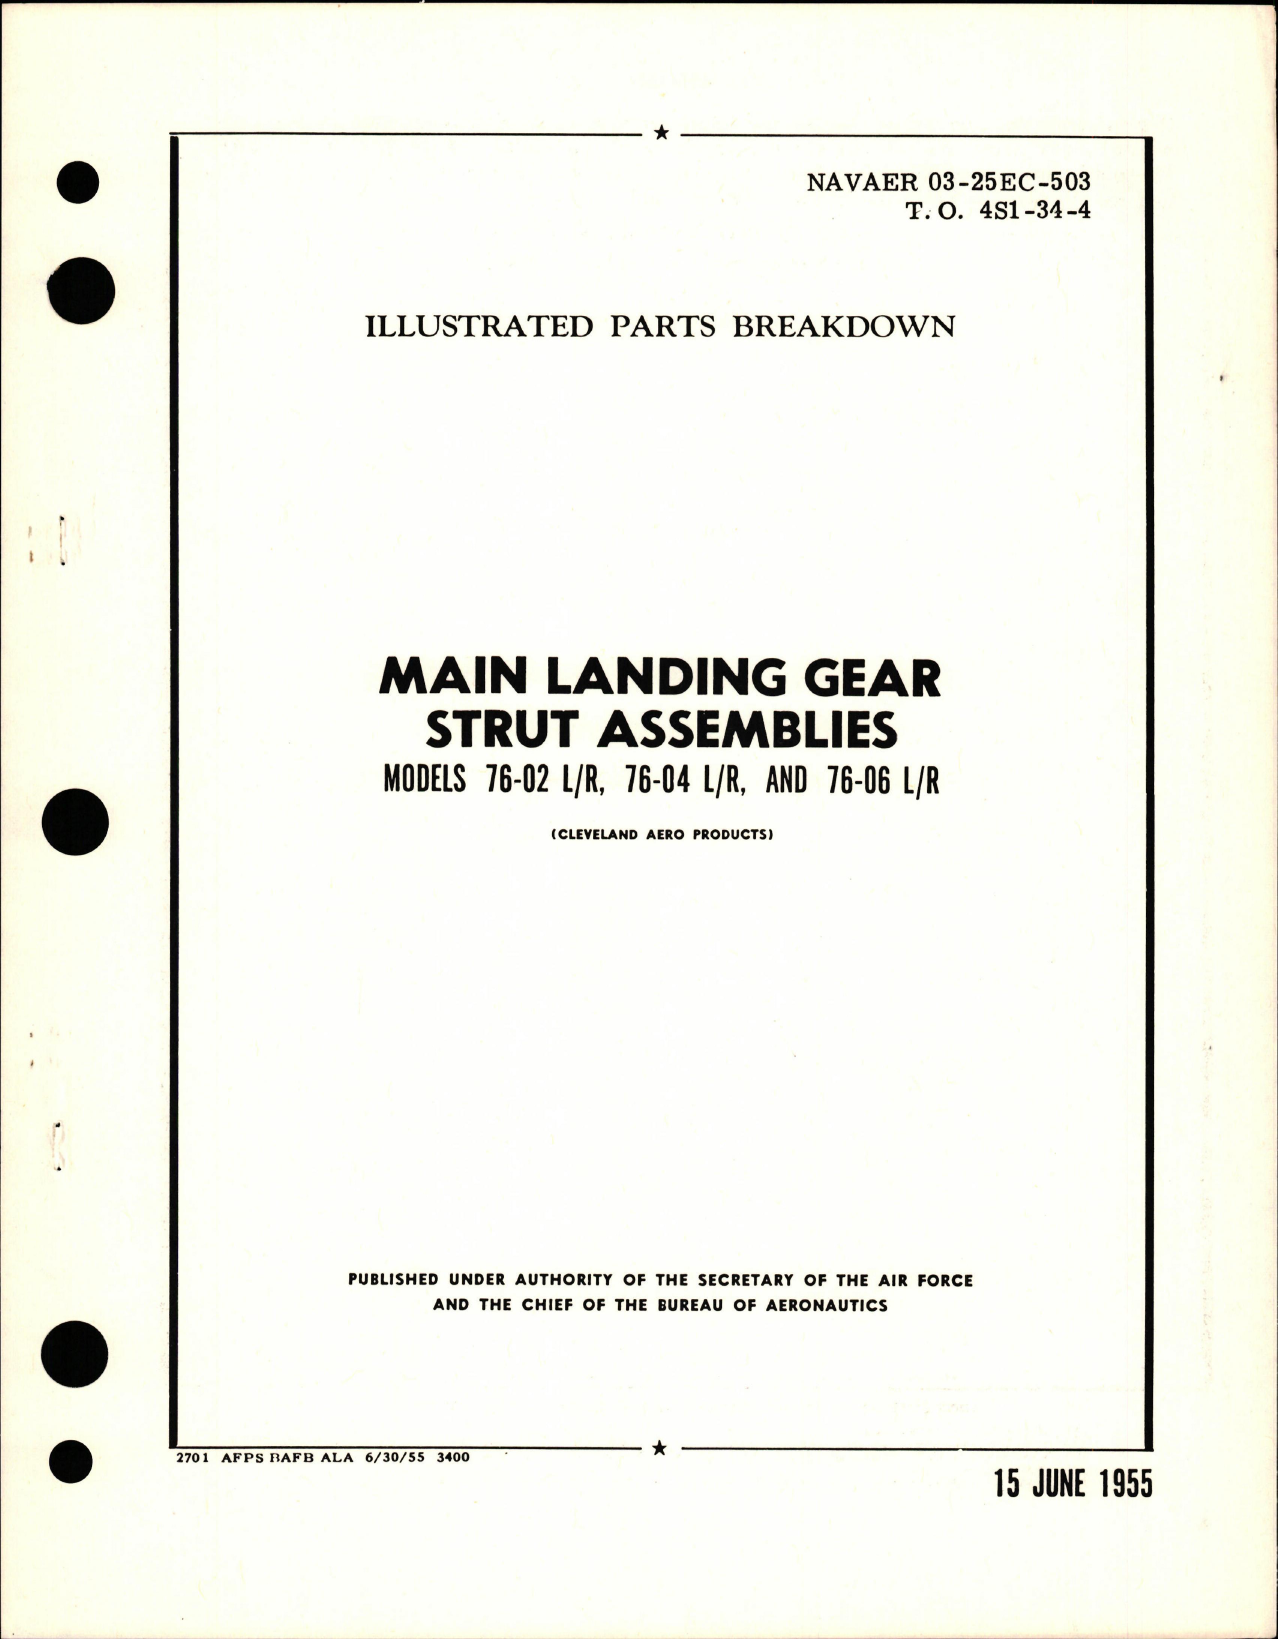 Sample page 1 from AirCorps Library document: Illustrated Parts Breakdown for Main Landing Gear Strut Assembly - Models 76-02, 76-04, and 76-06